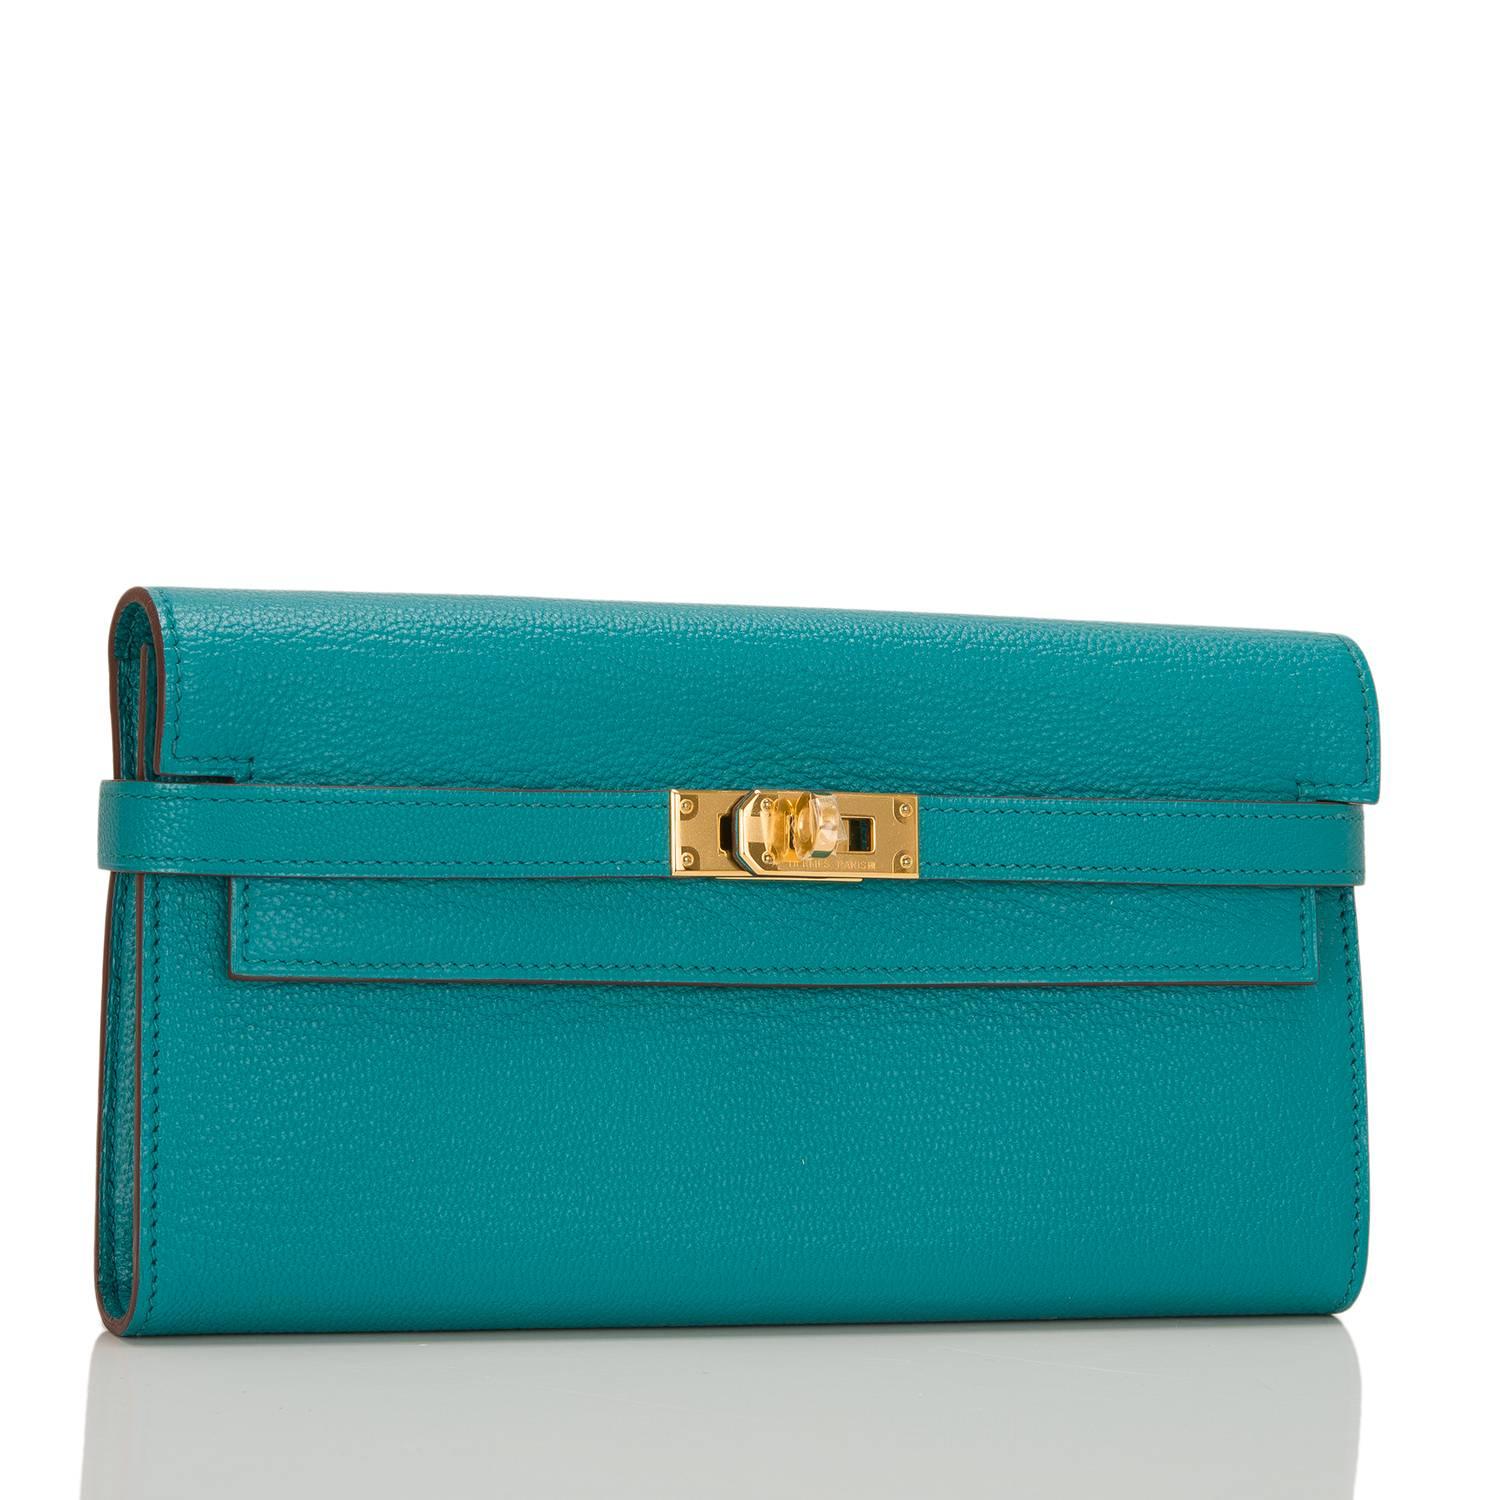 Hermes Blue Paon chevre Kelly Longue Wallet with gold hardware.

This style features tonal stitching, gold hardware, front toggle closure and gusseted sides.

The interior is lined in Blue Paon chevre leather and features one front wall